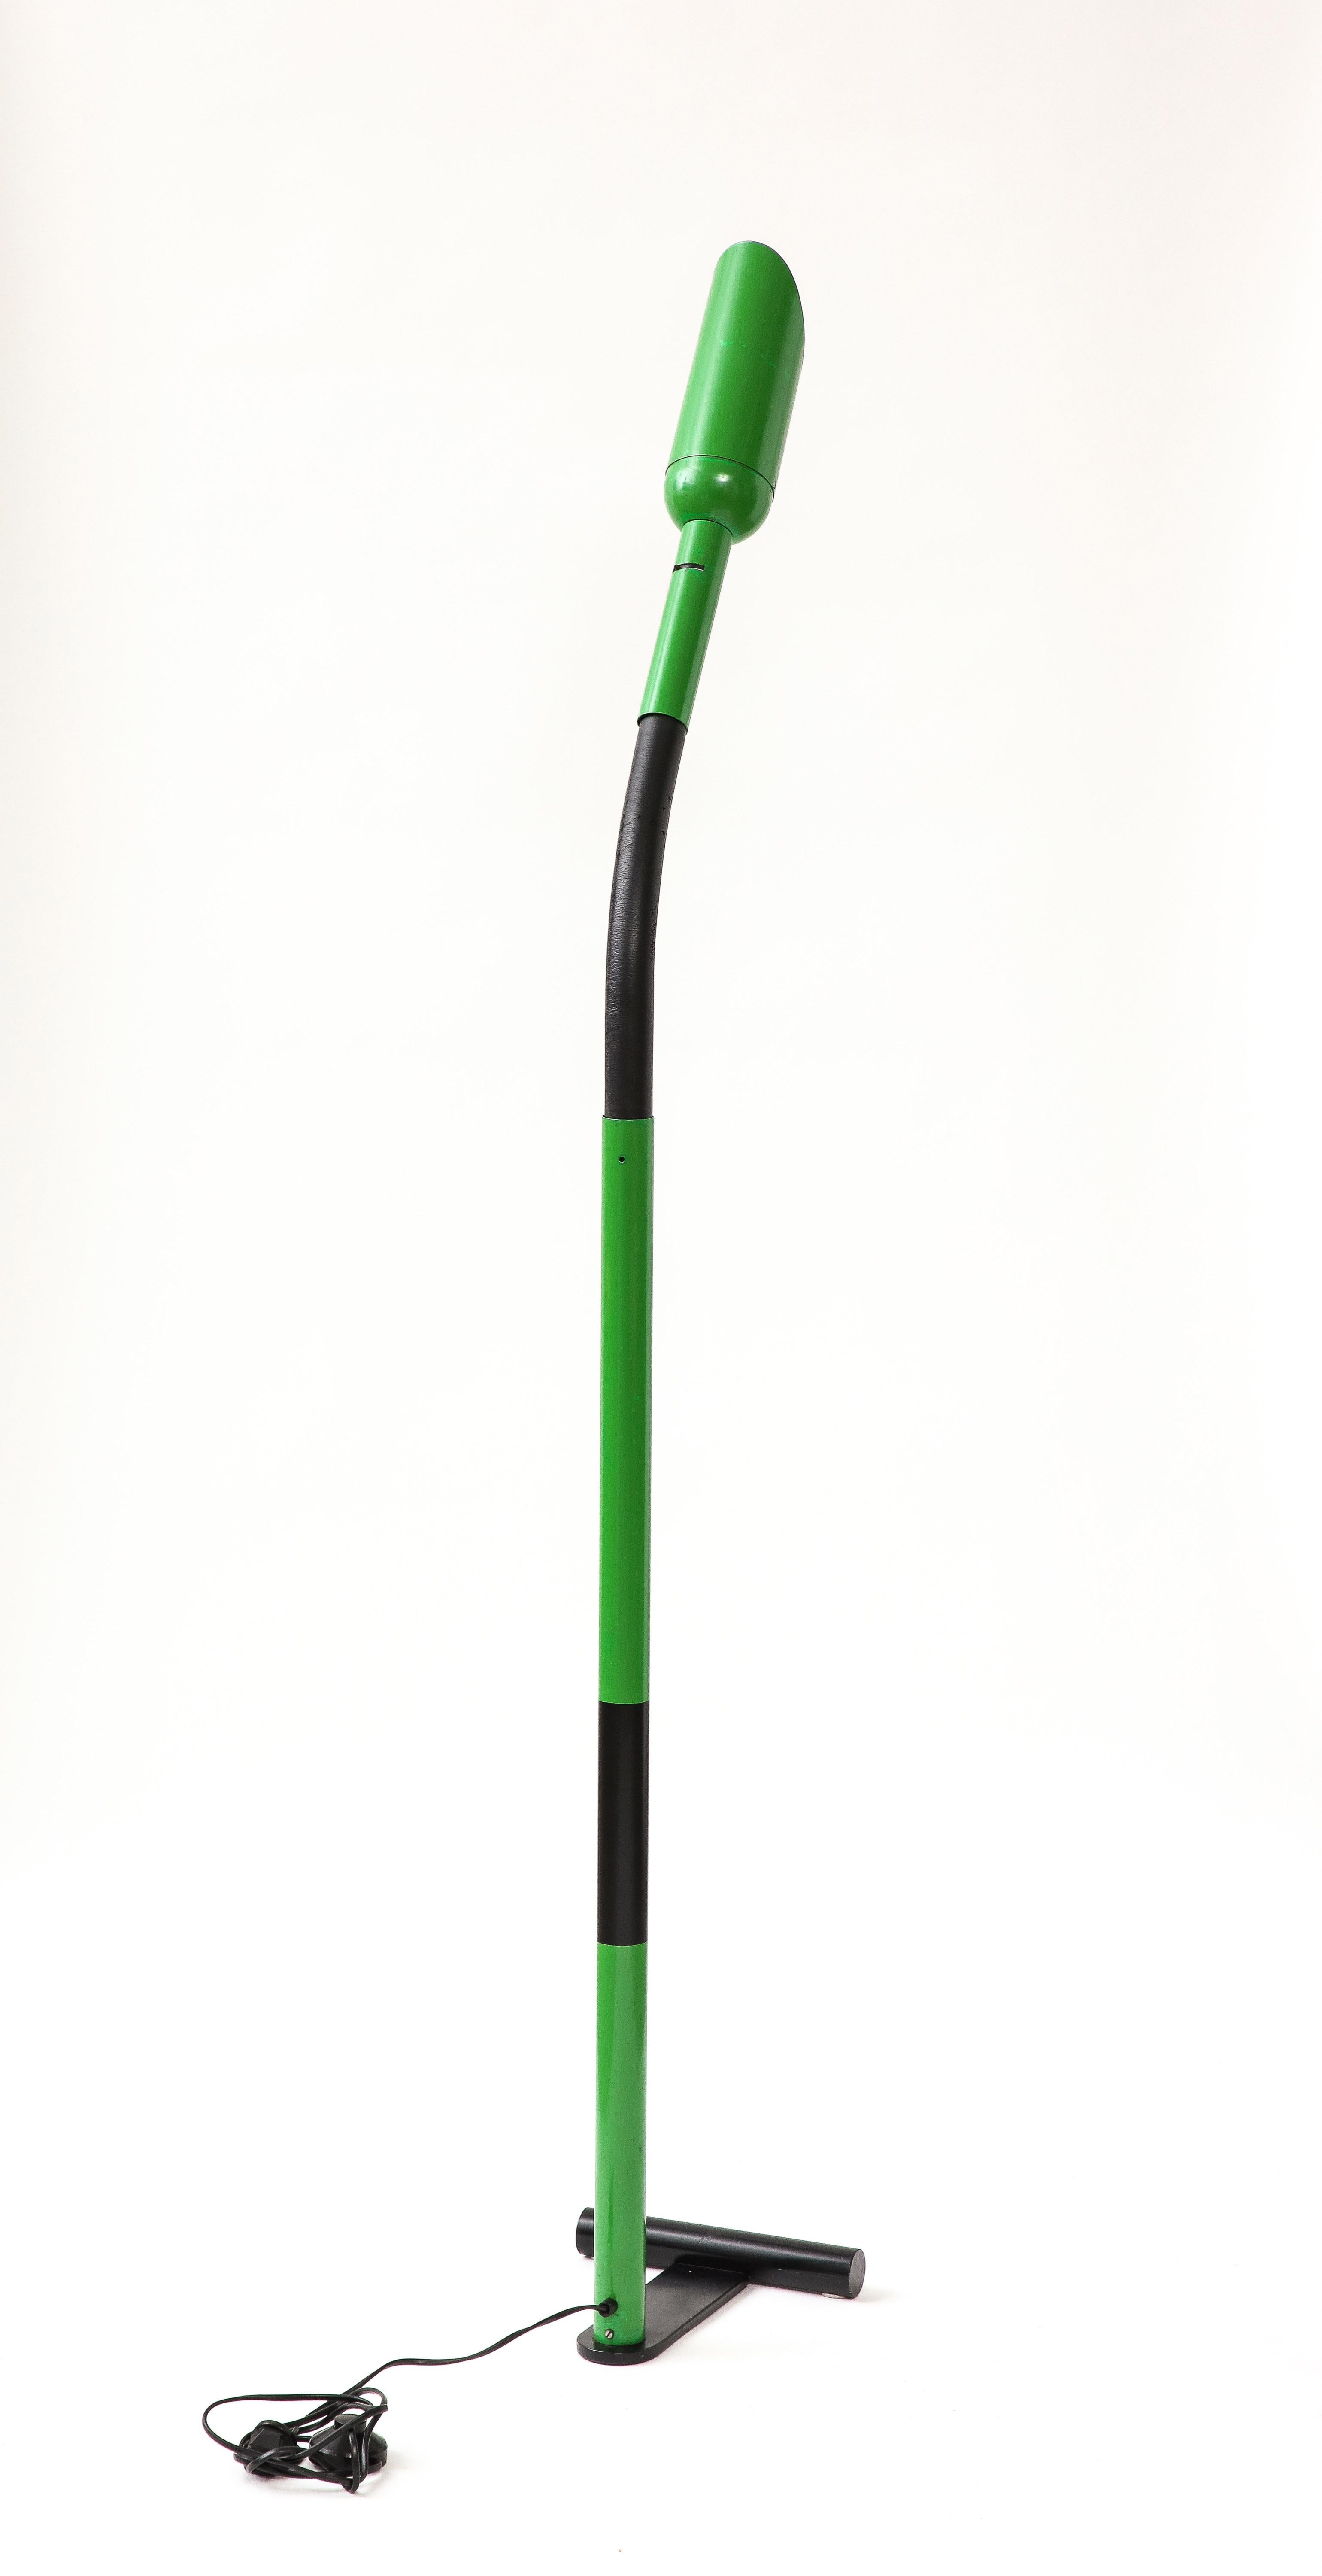 Italian Lacquered Green Metal Floor Lamp, Italy, c. 1970 For Sale